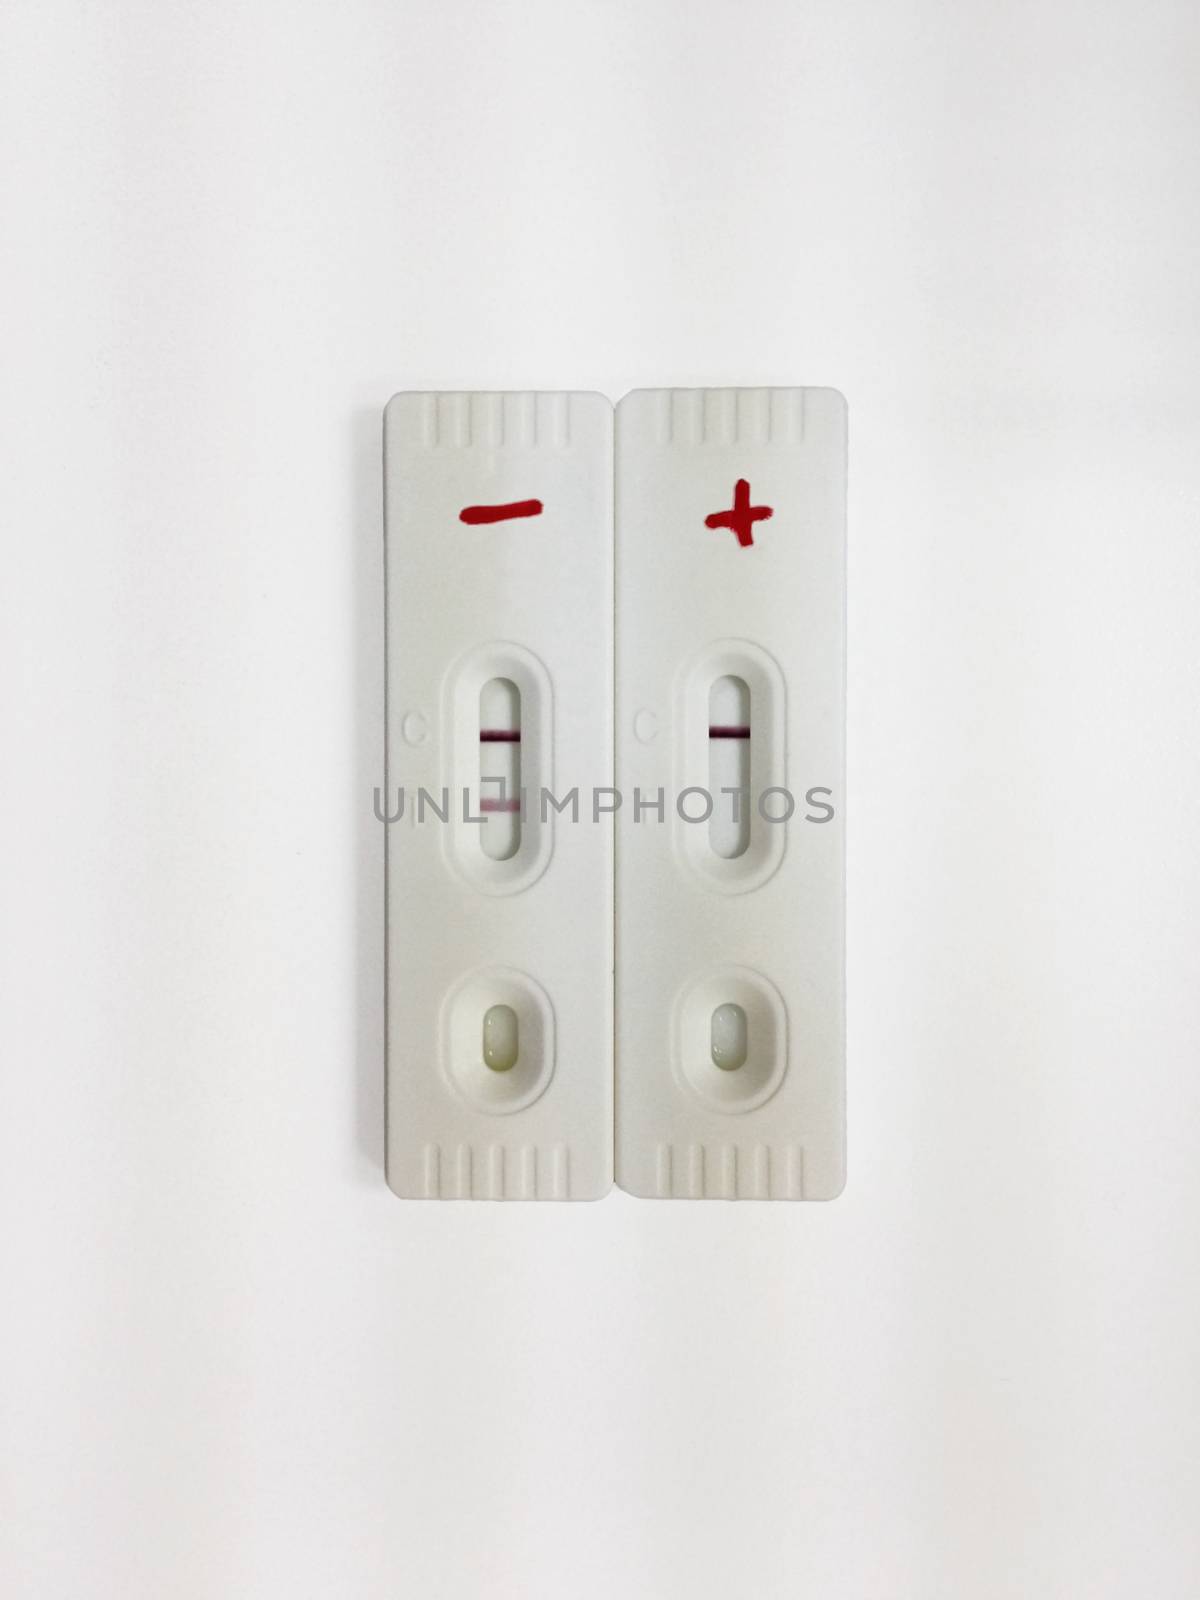 Negative and positive screening test cassette strips for analysis of abused drug in the urine